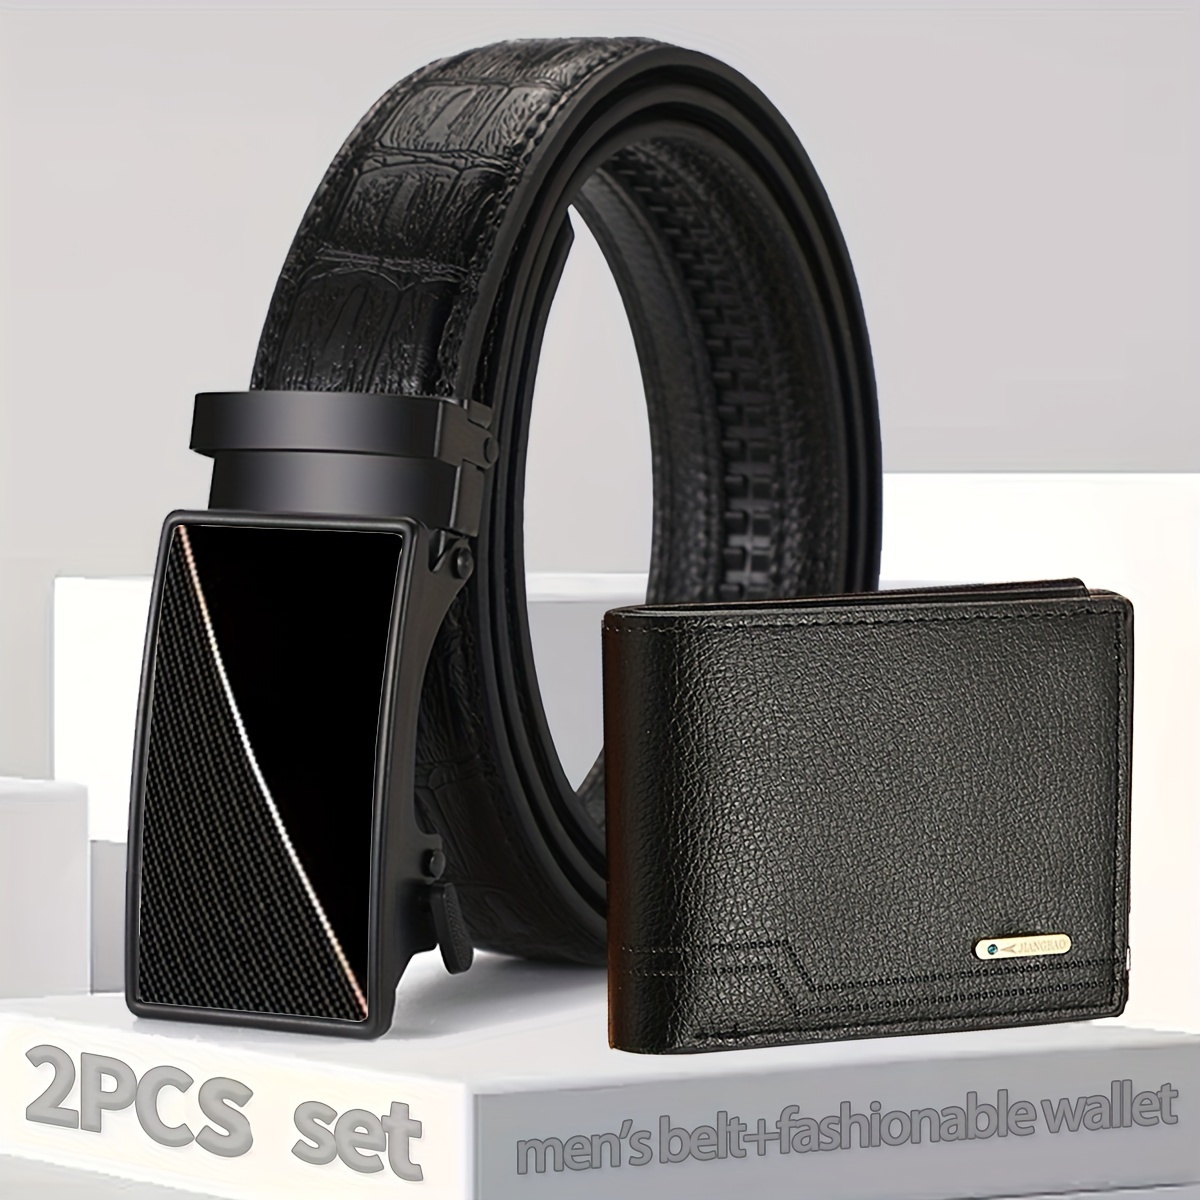 

2pcs Crocodile Print Men's Belt, Men's Leather Belt + Wallet Set, Black Automatic Buckle Belt For Boyfriend Dad Brother, Holiday Gift, All-match Casual Young Business Fashion Pants Belt-one Size